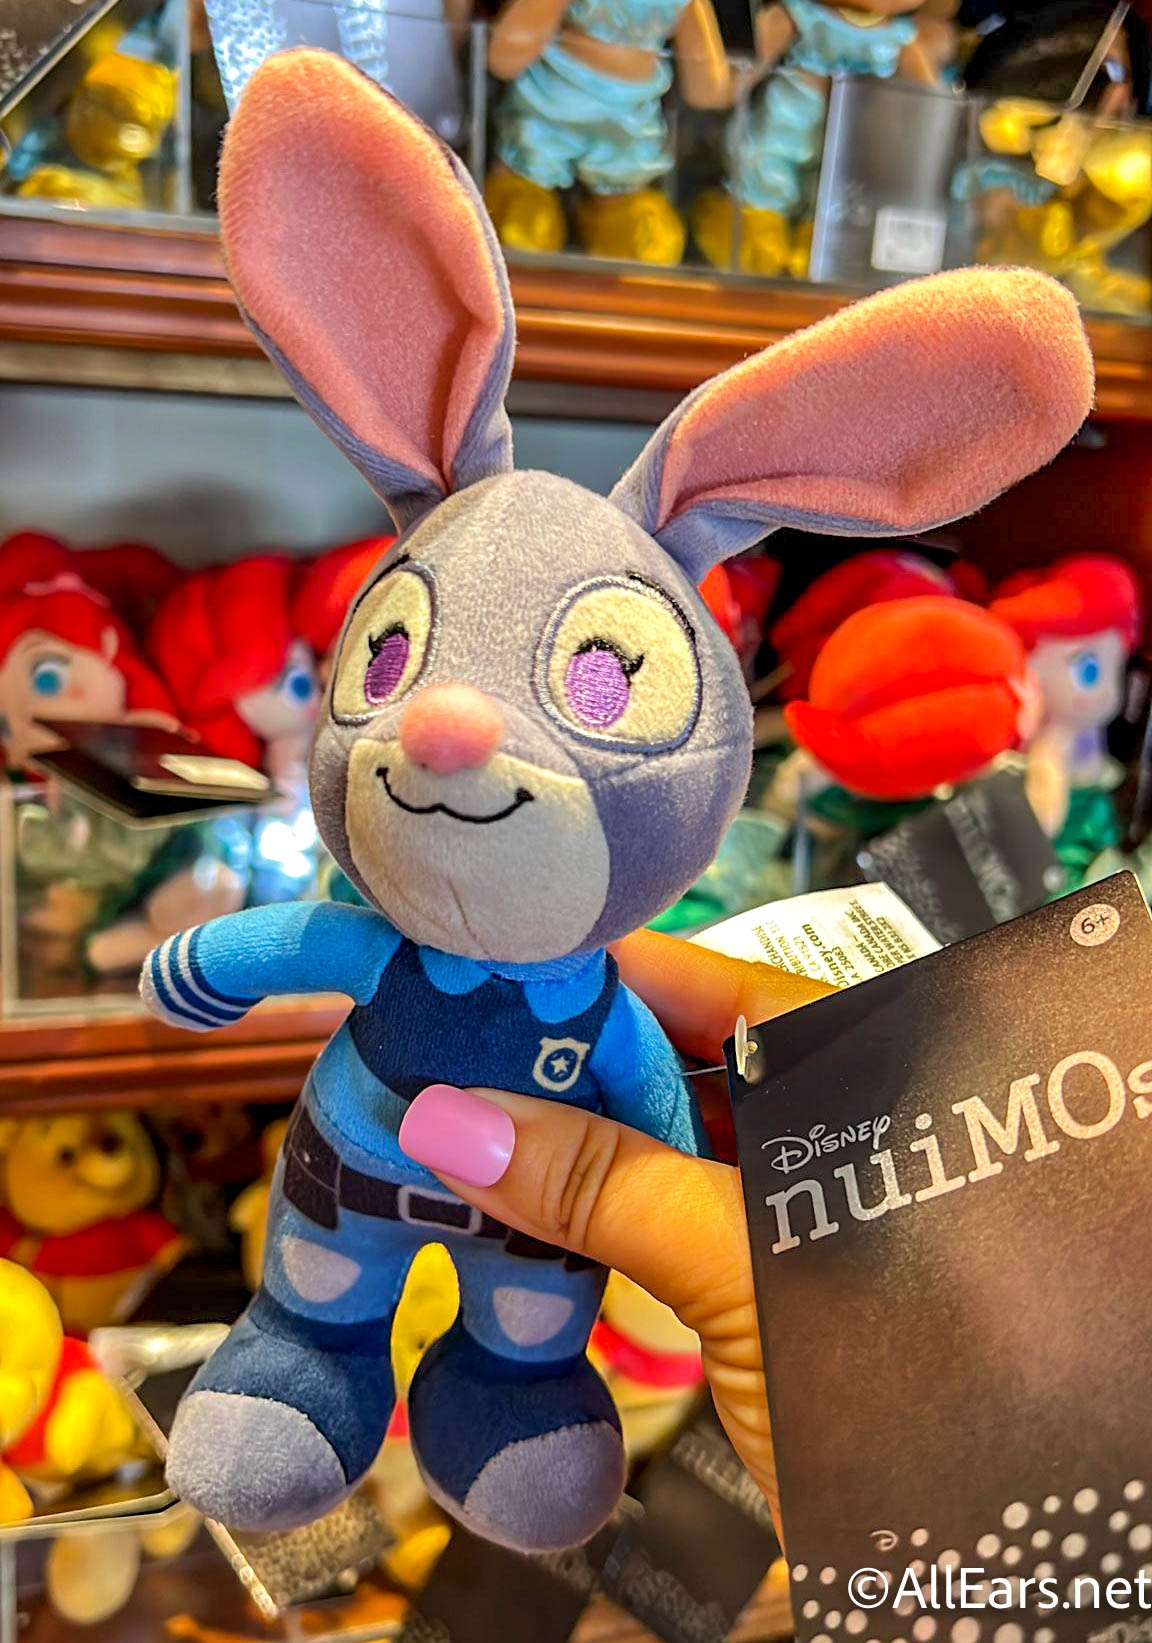 New Designer Swag for Disney nuiMOs Appears at Magic Kingdom